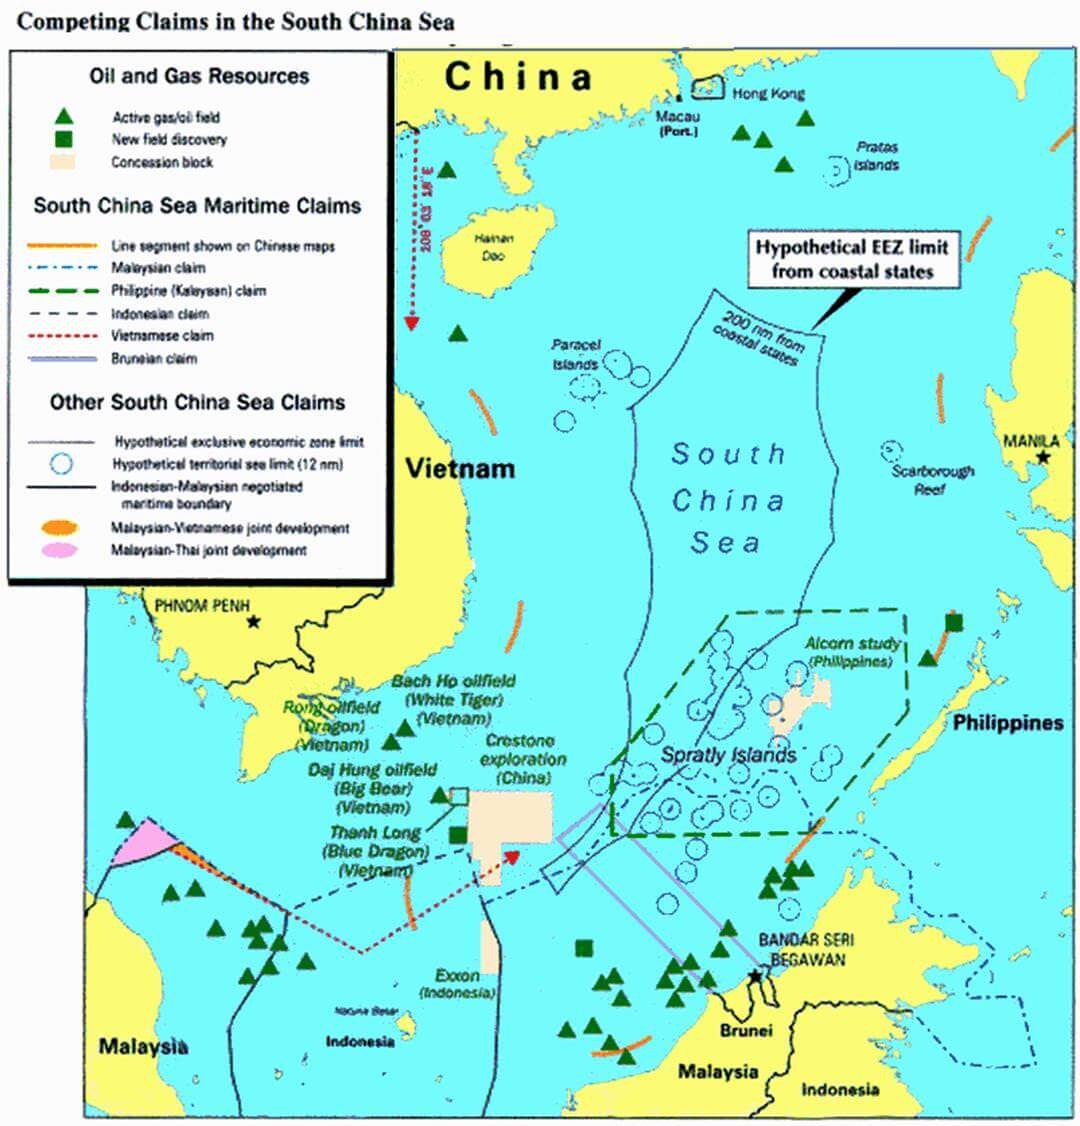 Land Disputes in the South China Sea: Parcel Islands and Spratly Islands